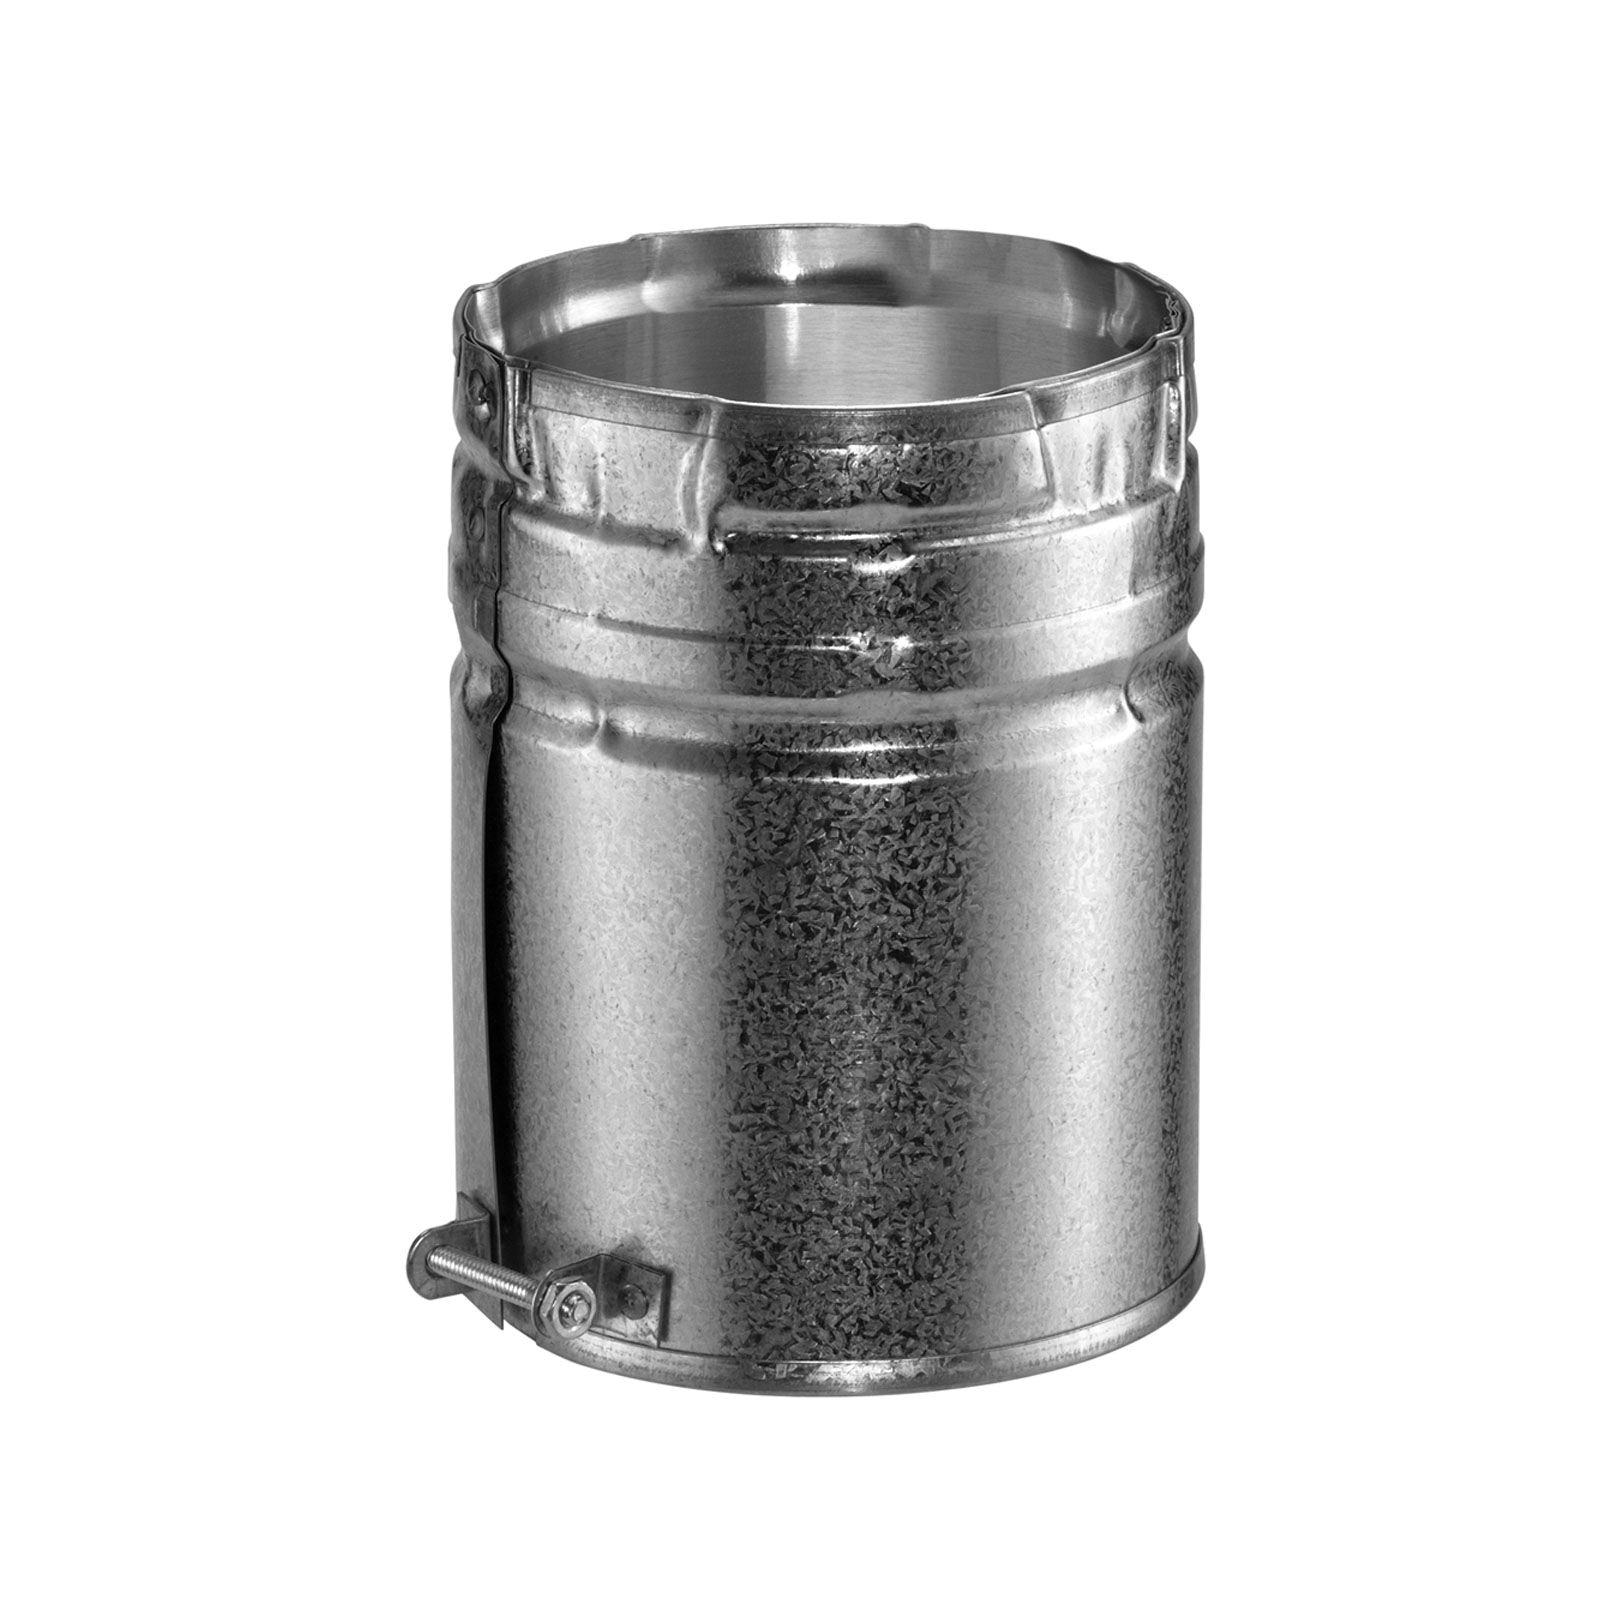 DuraVent® 3GVAM Male Adapter, 3 in, 0.012 in Aluminum Inner and 0.018 in Galvanized Steel Outer Wall